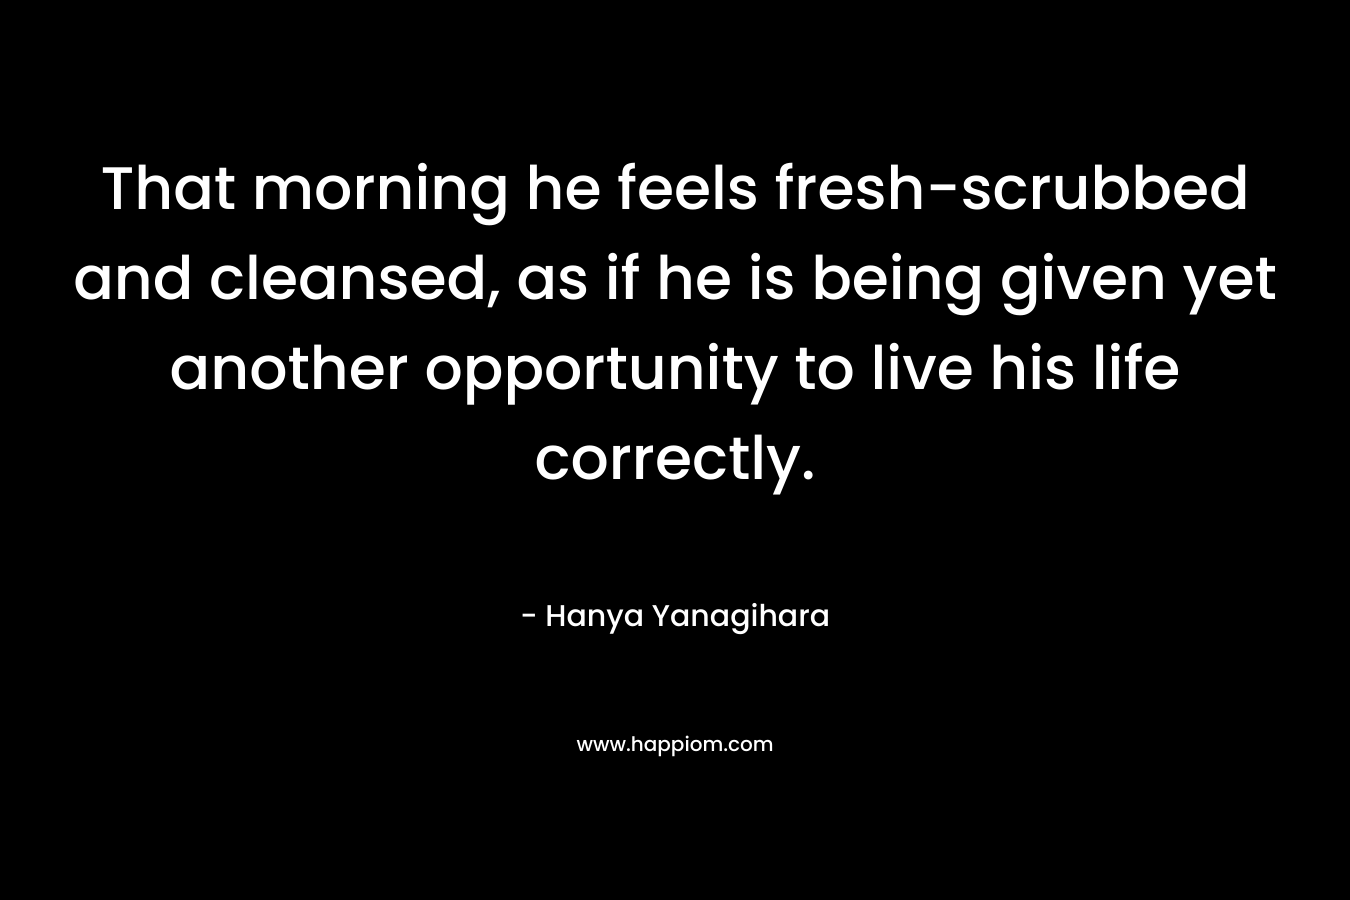 That morning he feels fresh-scrubbed and cleansed, as if he is being given yet another opportunity to live his life correctly. – Hanya Yanagihara